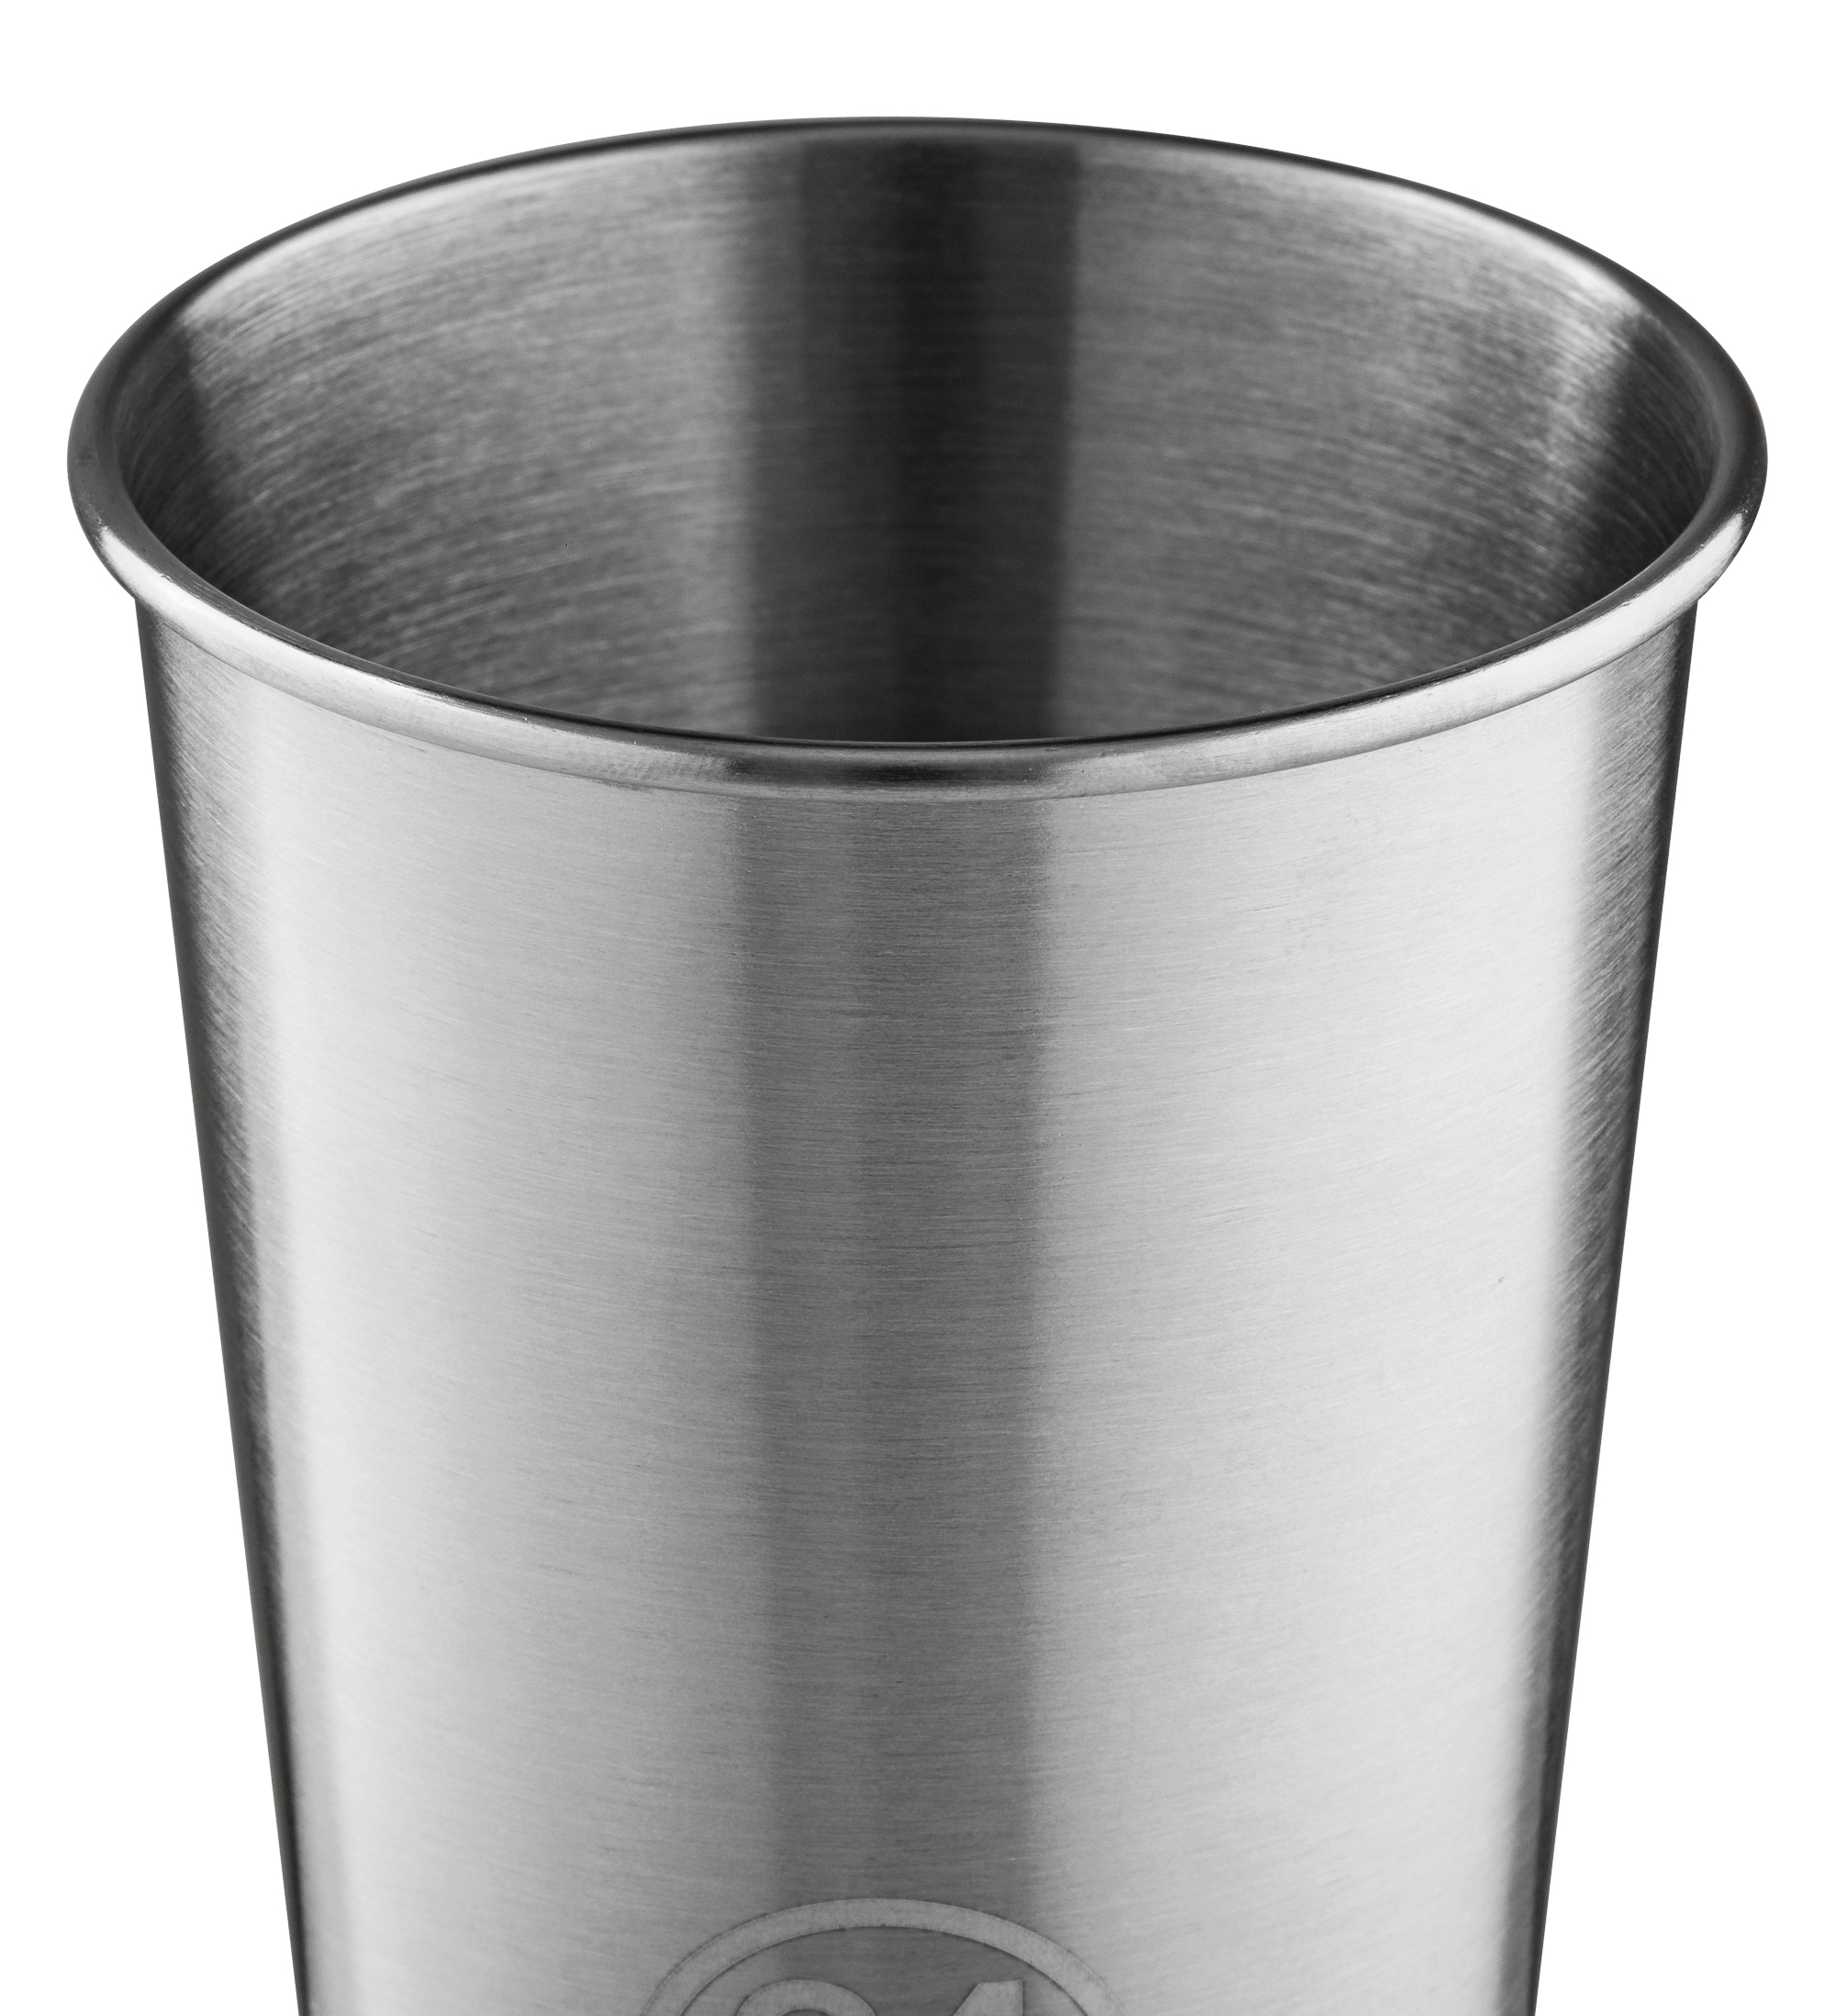 24bottles® Stainless Steel Party Cup – set of 4